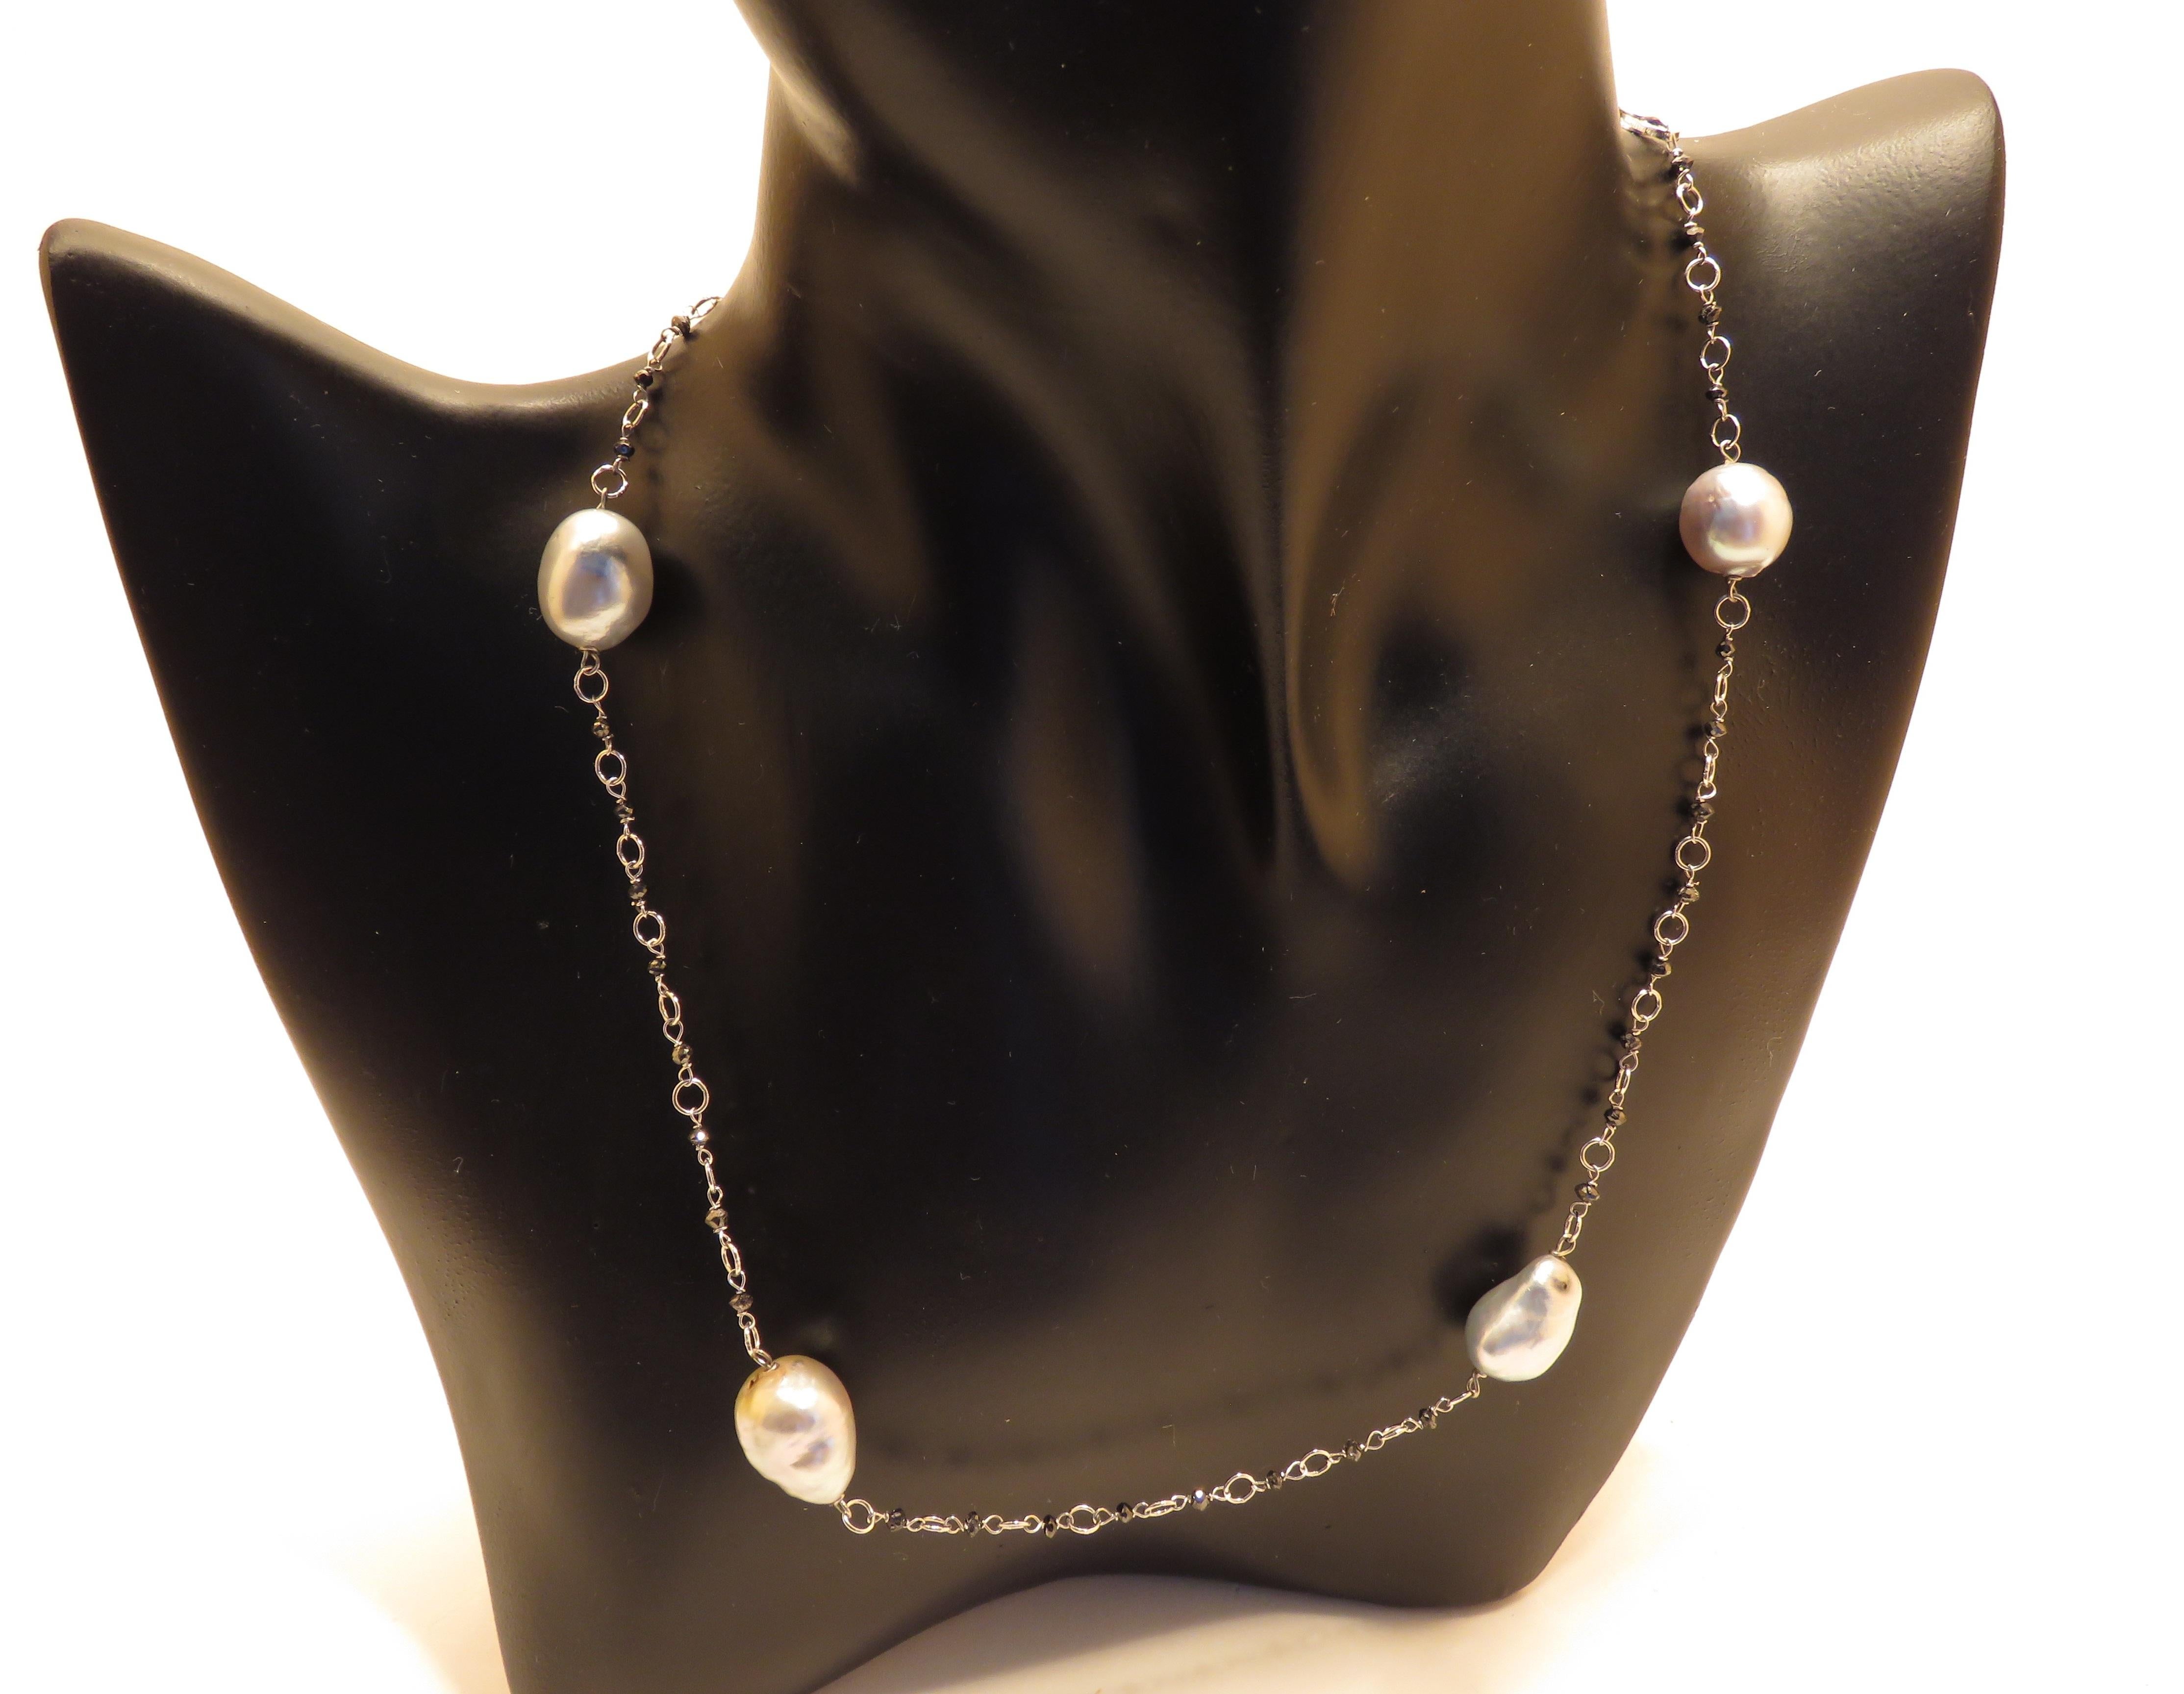 Unbelievable 5 natural Tahiti pearls (12 x 10 millimeters / 0.47 x 0.39 inches) and black diamonds necklace in 18k white gold. 
Total length is 430 millimeters / 16.92  inches.
Handcrafted in Italy by Botta Gioielli.
This item is stamped with the